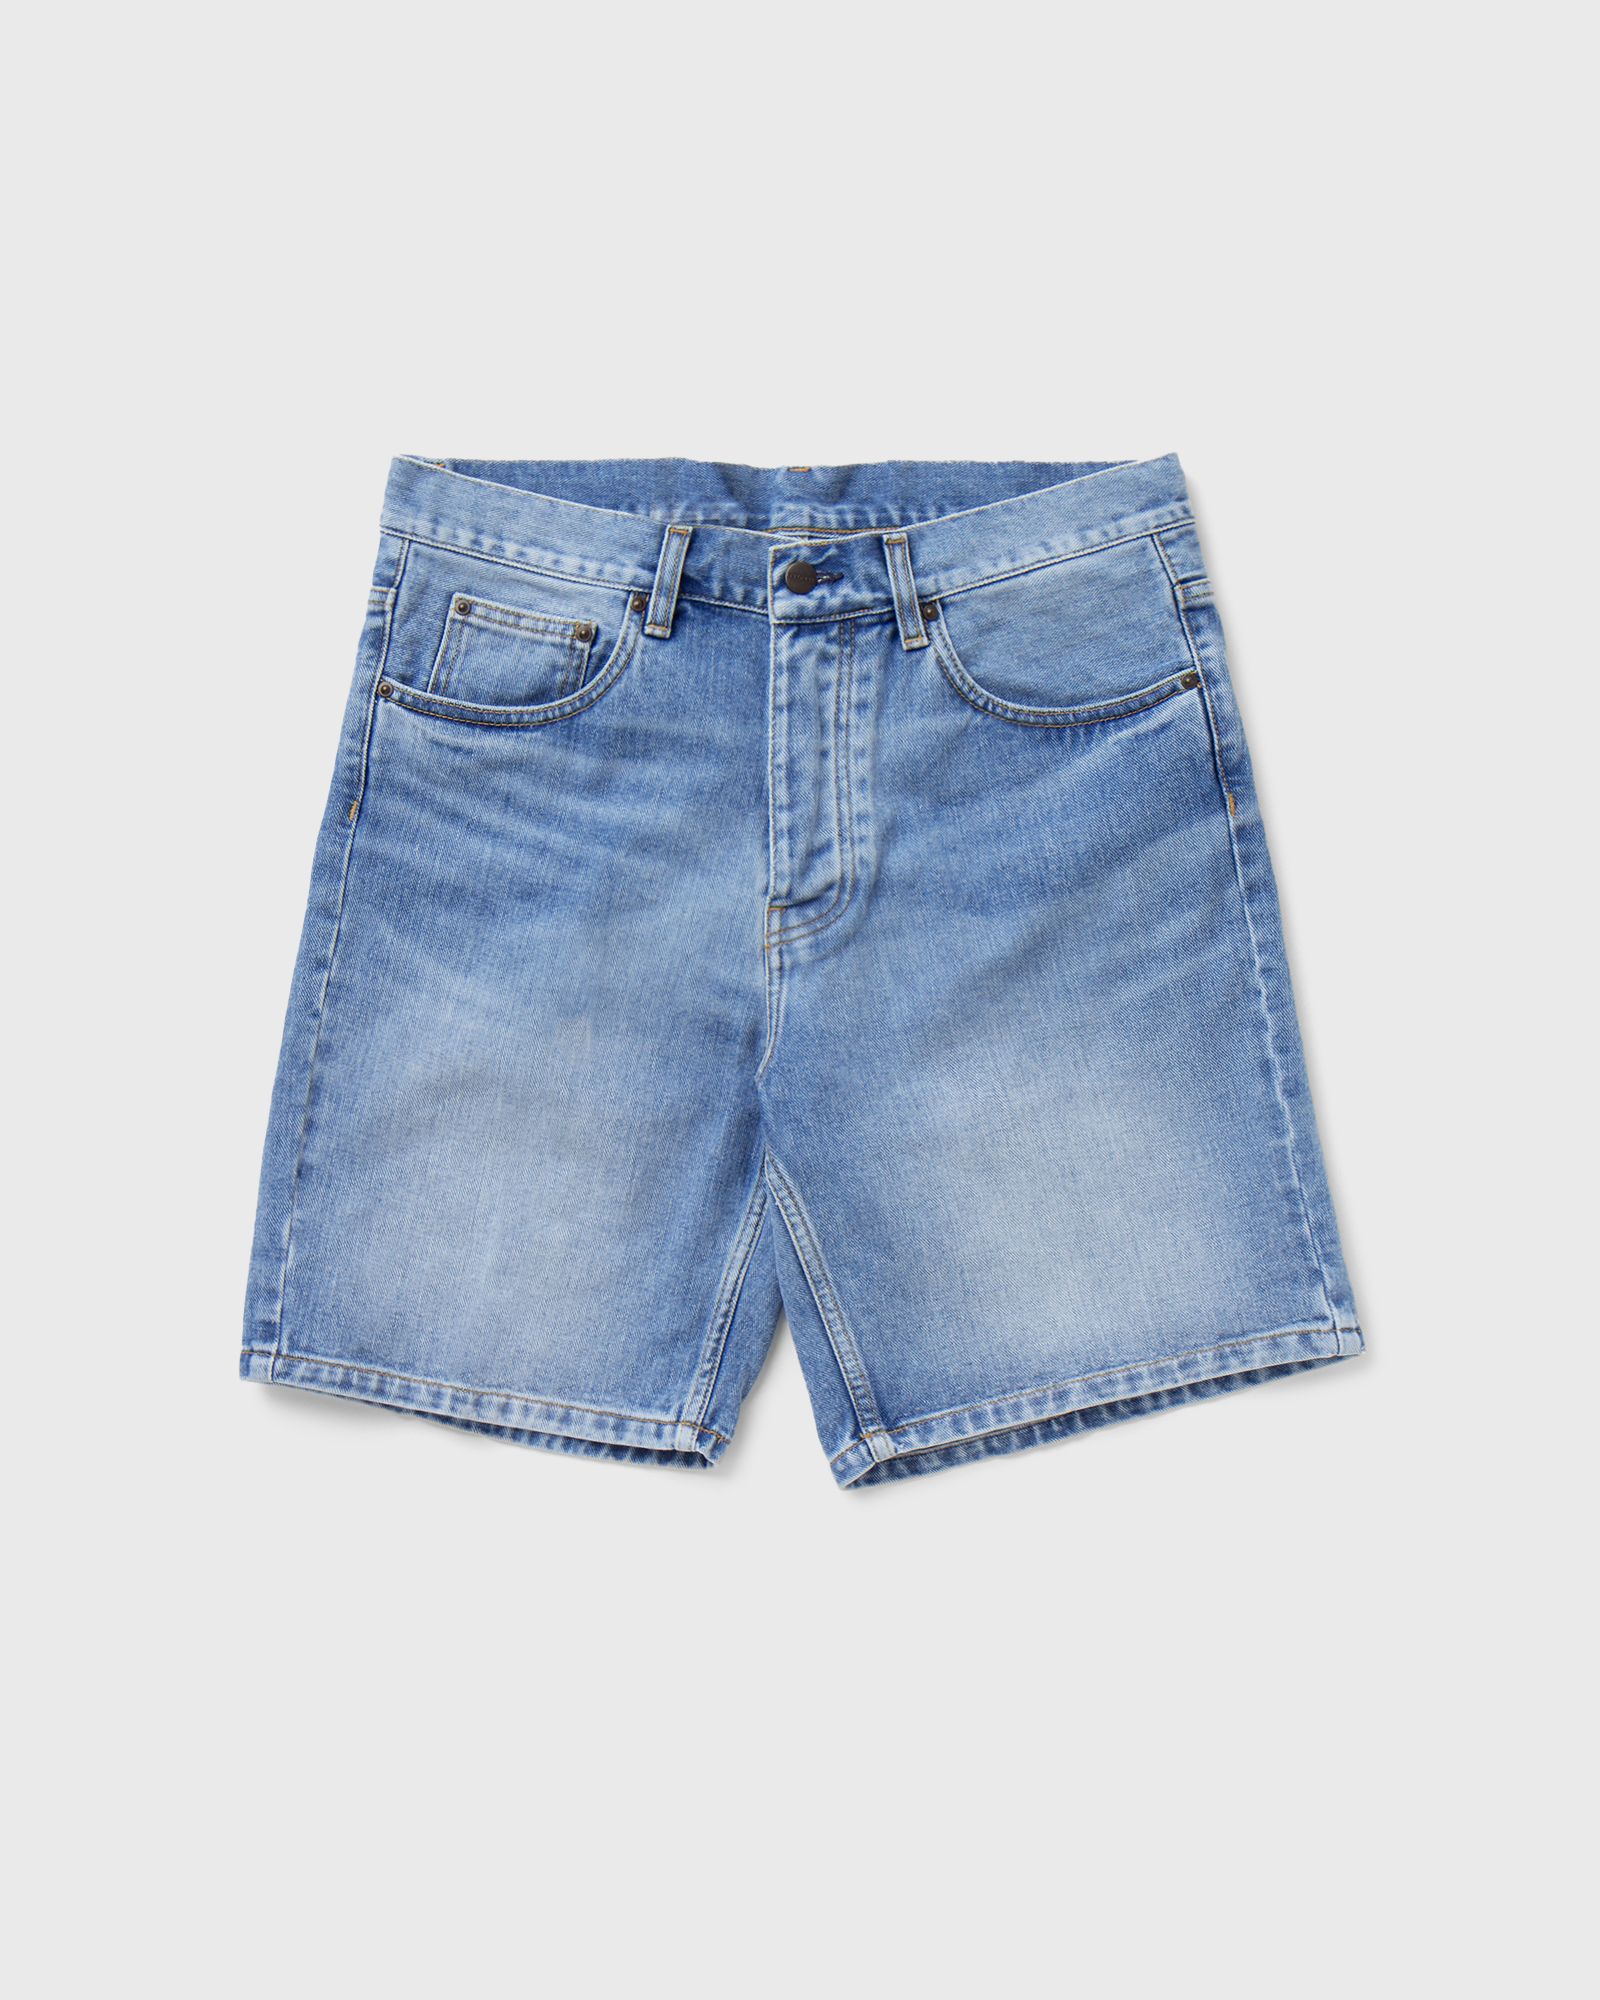 Get the Carhartt WIP Newel Short BLUE men Shorts now available at BSTN ...